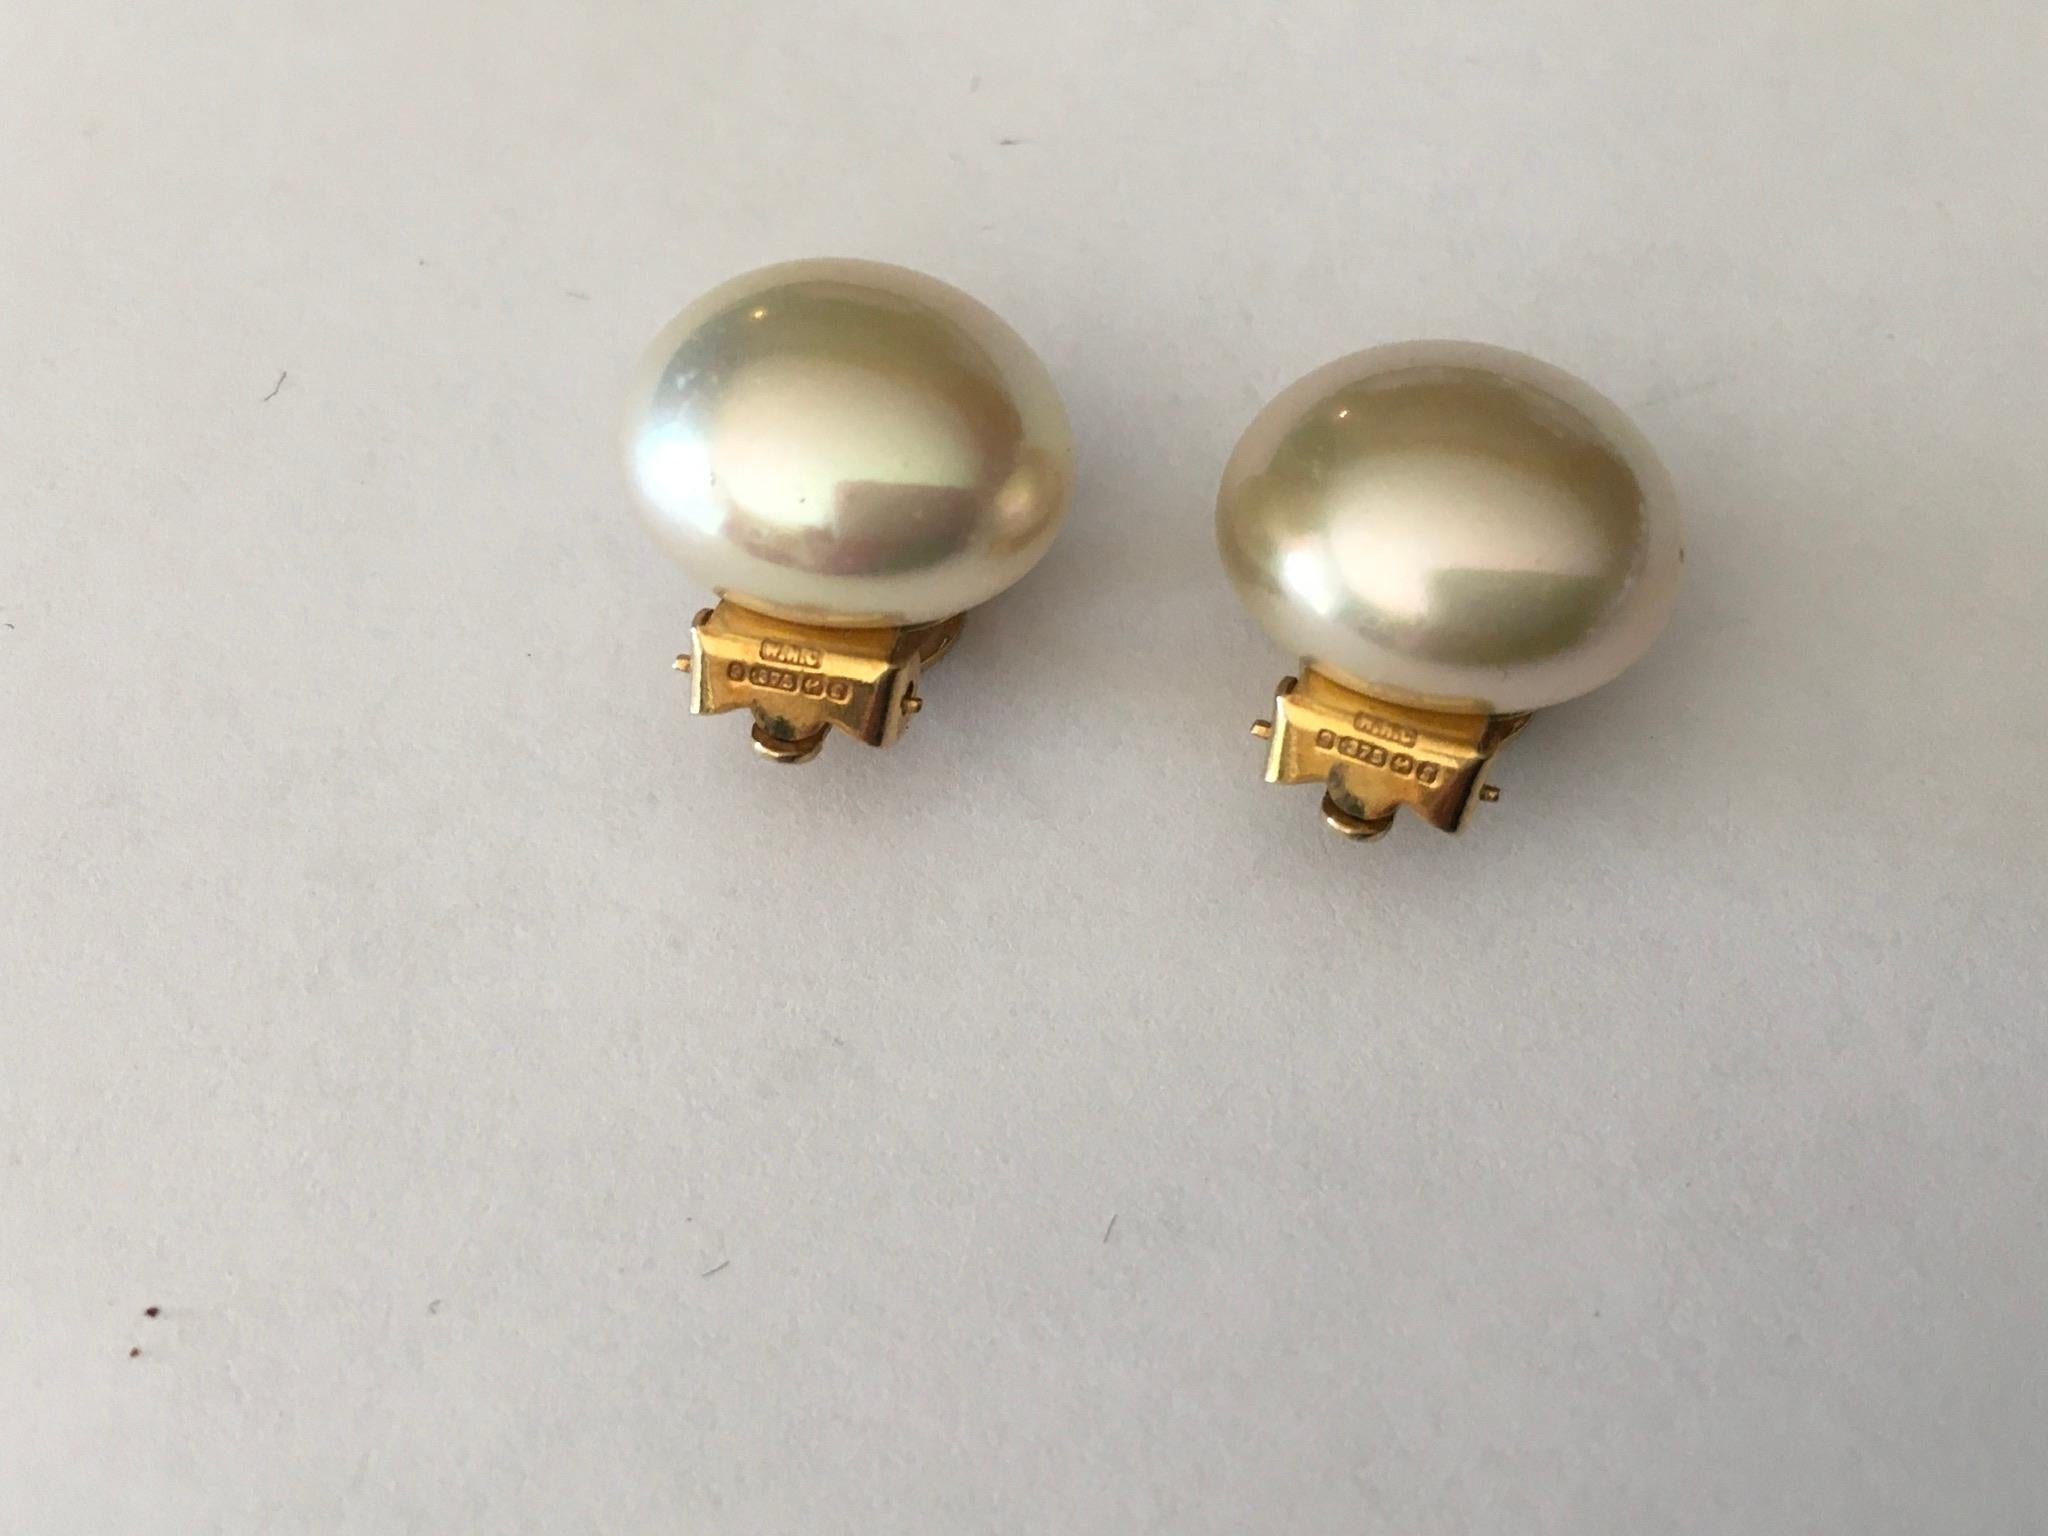 In very good condition clips in good working order 
9 carat yellow gold 
Hallmarks on each earring 375
Approx diameter of pearl 1.4 cms 
Very comfy to wear
They weigh 7 grams